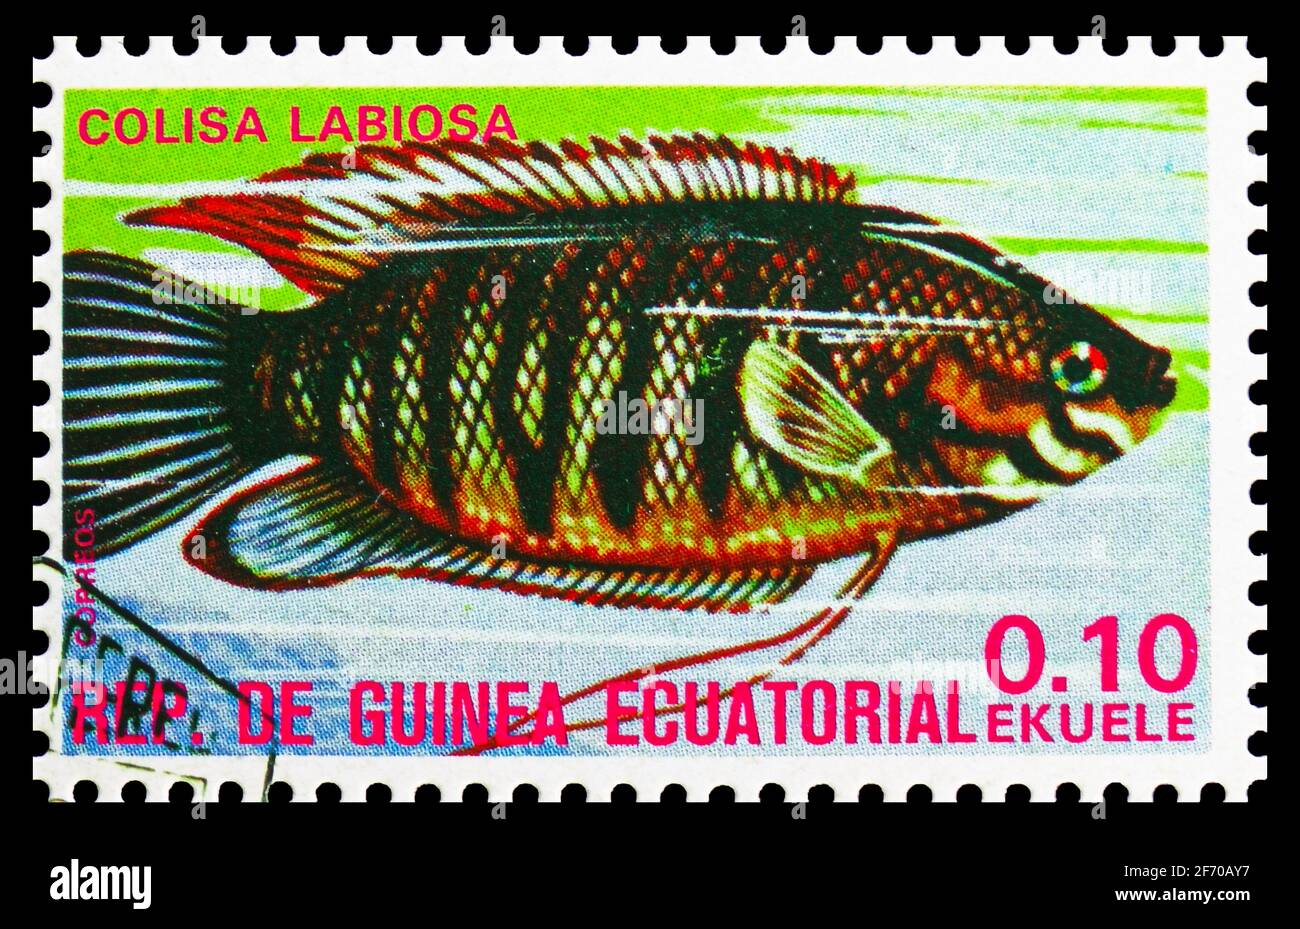 MOSCOW, RUSSIA - DECEMBER 19, 2020: Postage stamp printed in Equatorial Guinea shows Thick-lipped Gourami (Colisa labiosa), Fishes (I) exotic serie, c Stock Photo